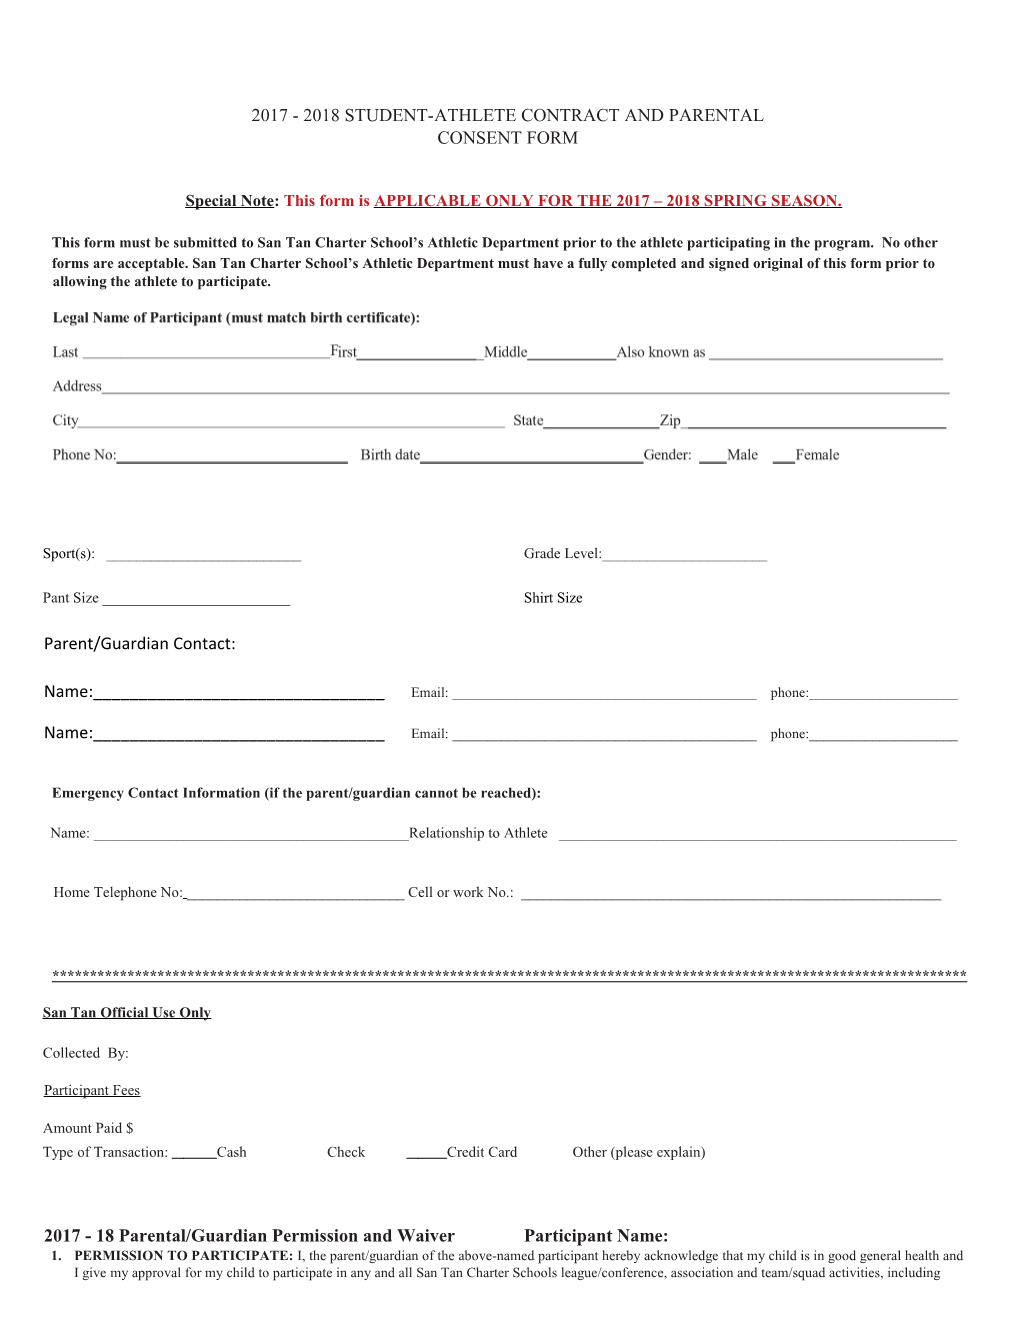 2015-2016 Spring Season STCS STUDENT-ATHLETE CONTRACT and PARENTAL CONSENT FORM